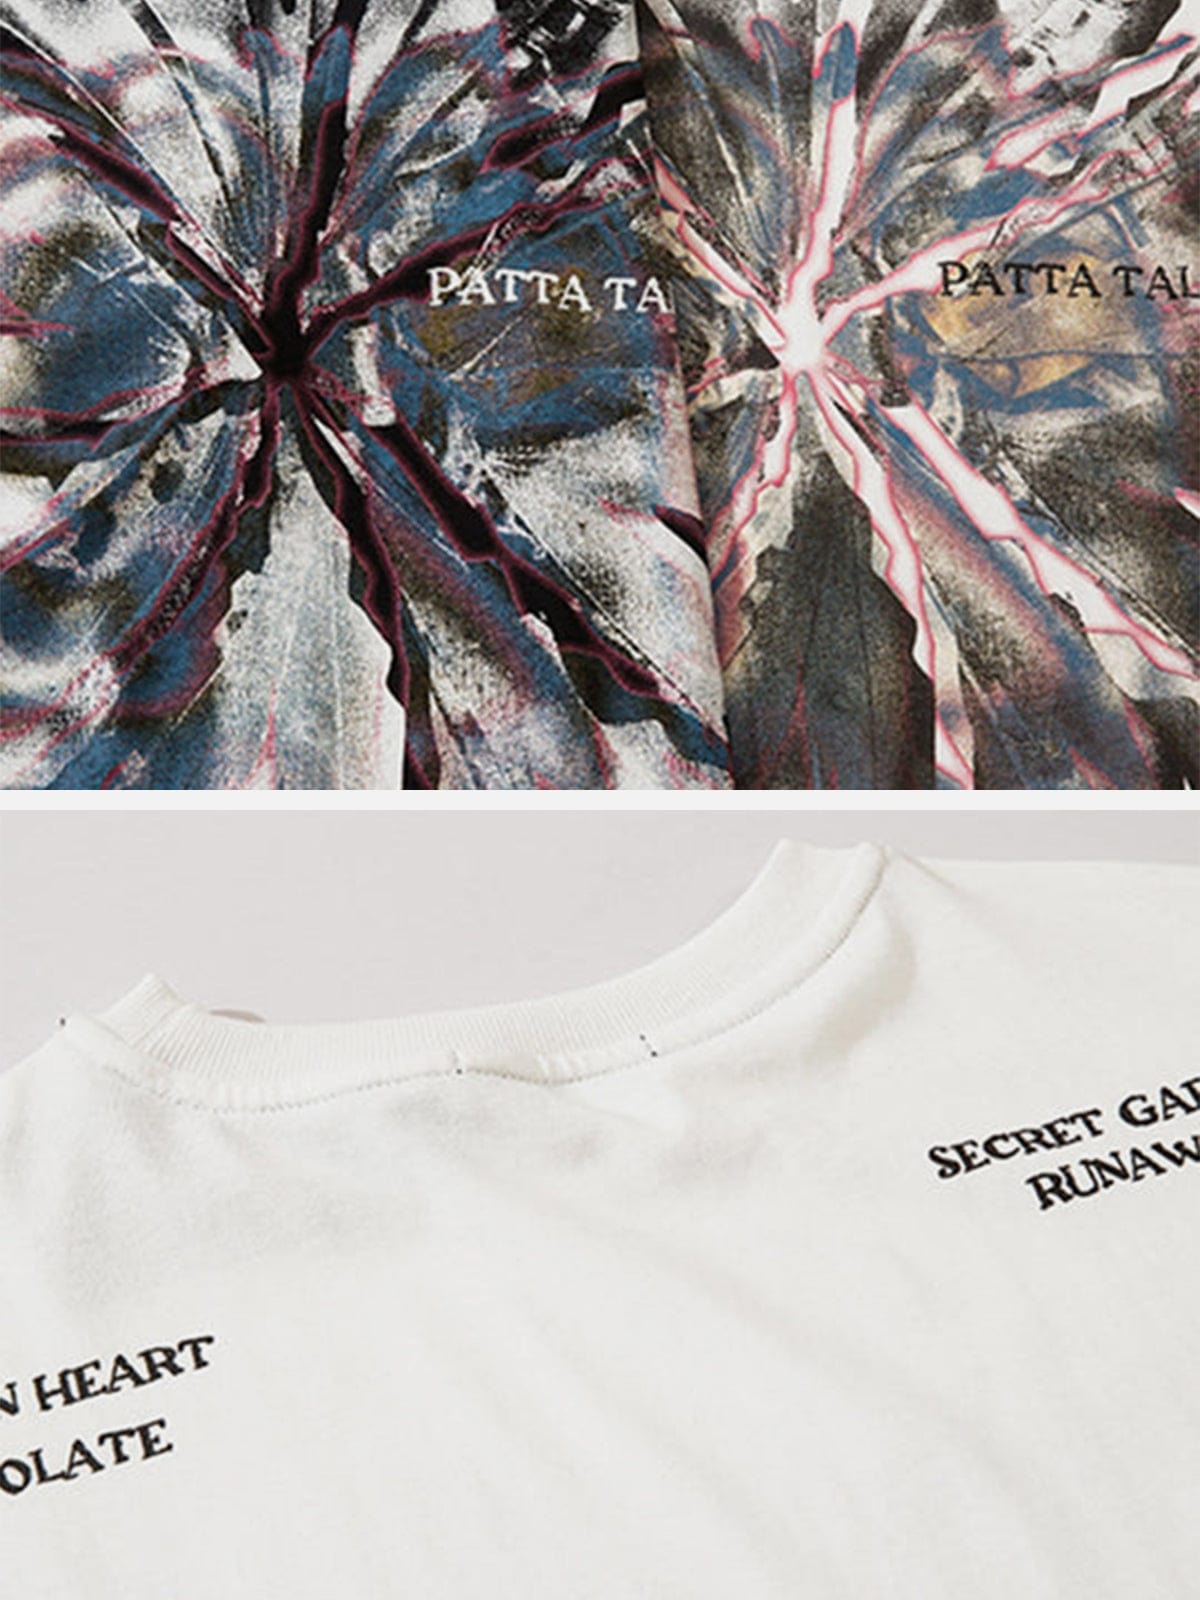 Leaf Letters Graphic Tee Streetwear Brand Techwear Combat Tactical YUGEN THEORY